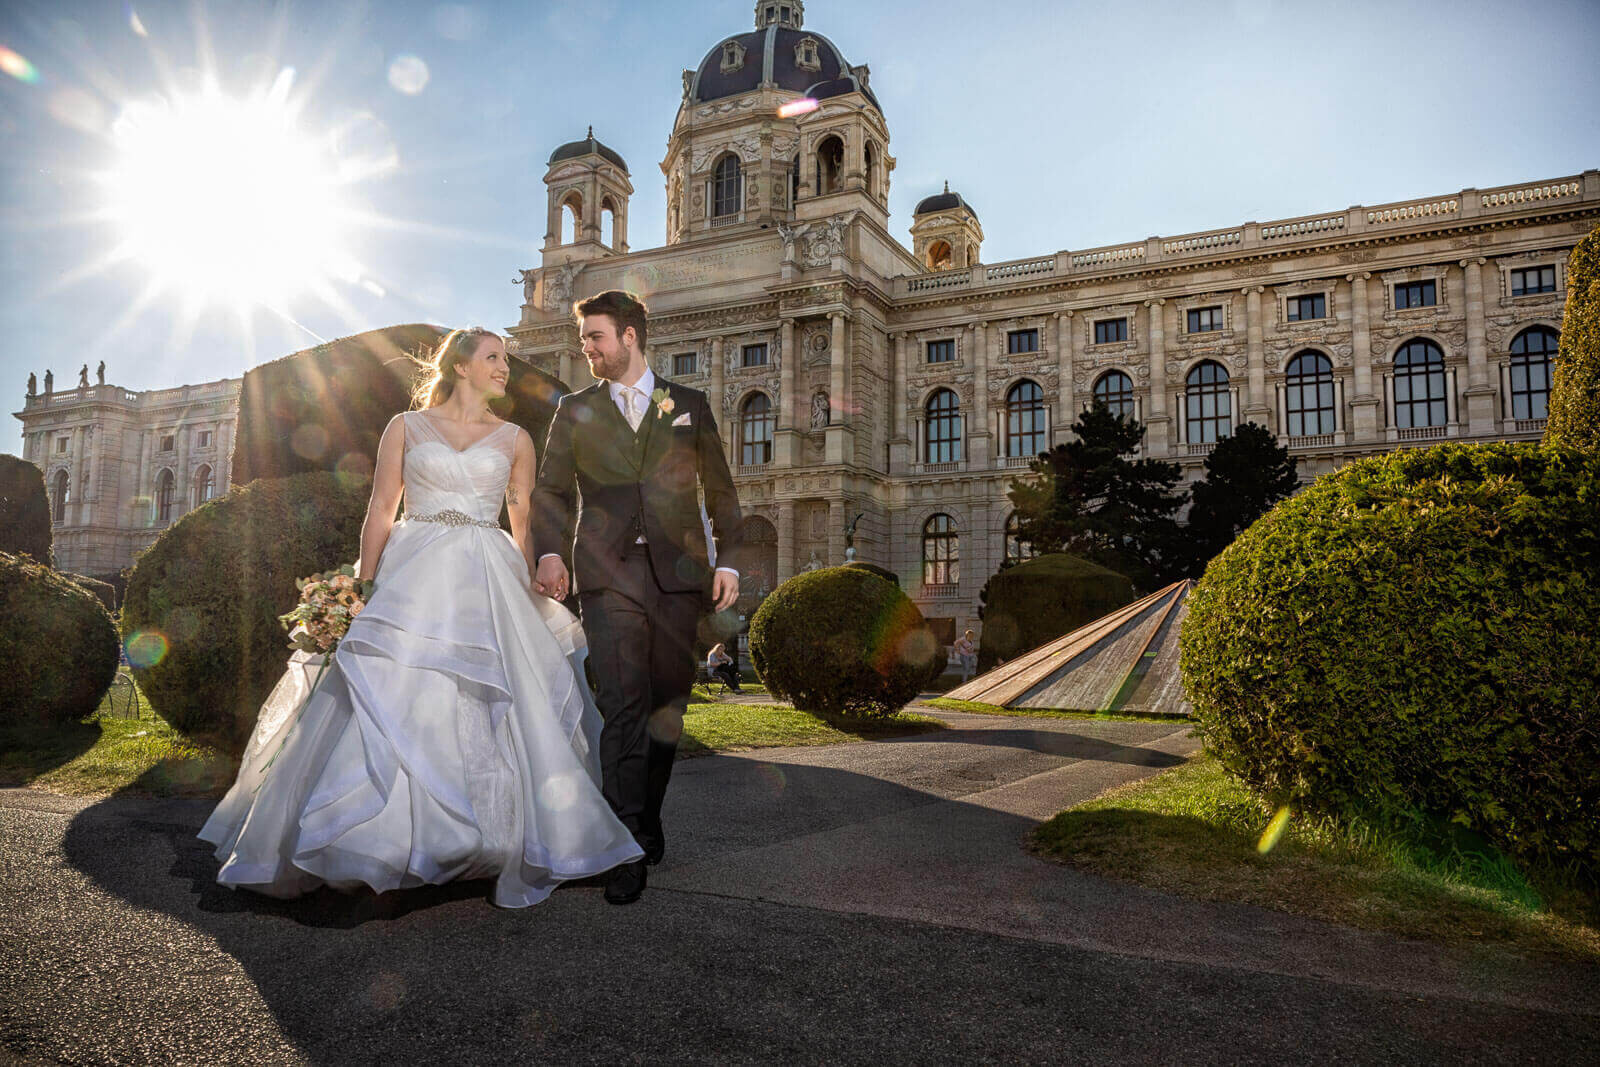 Tips for beautiful wedding photos on your wedding day